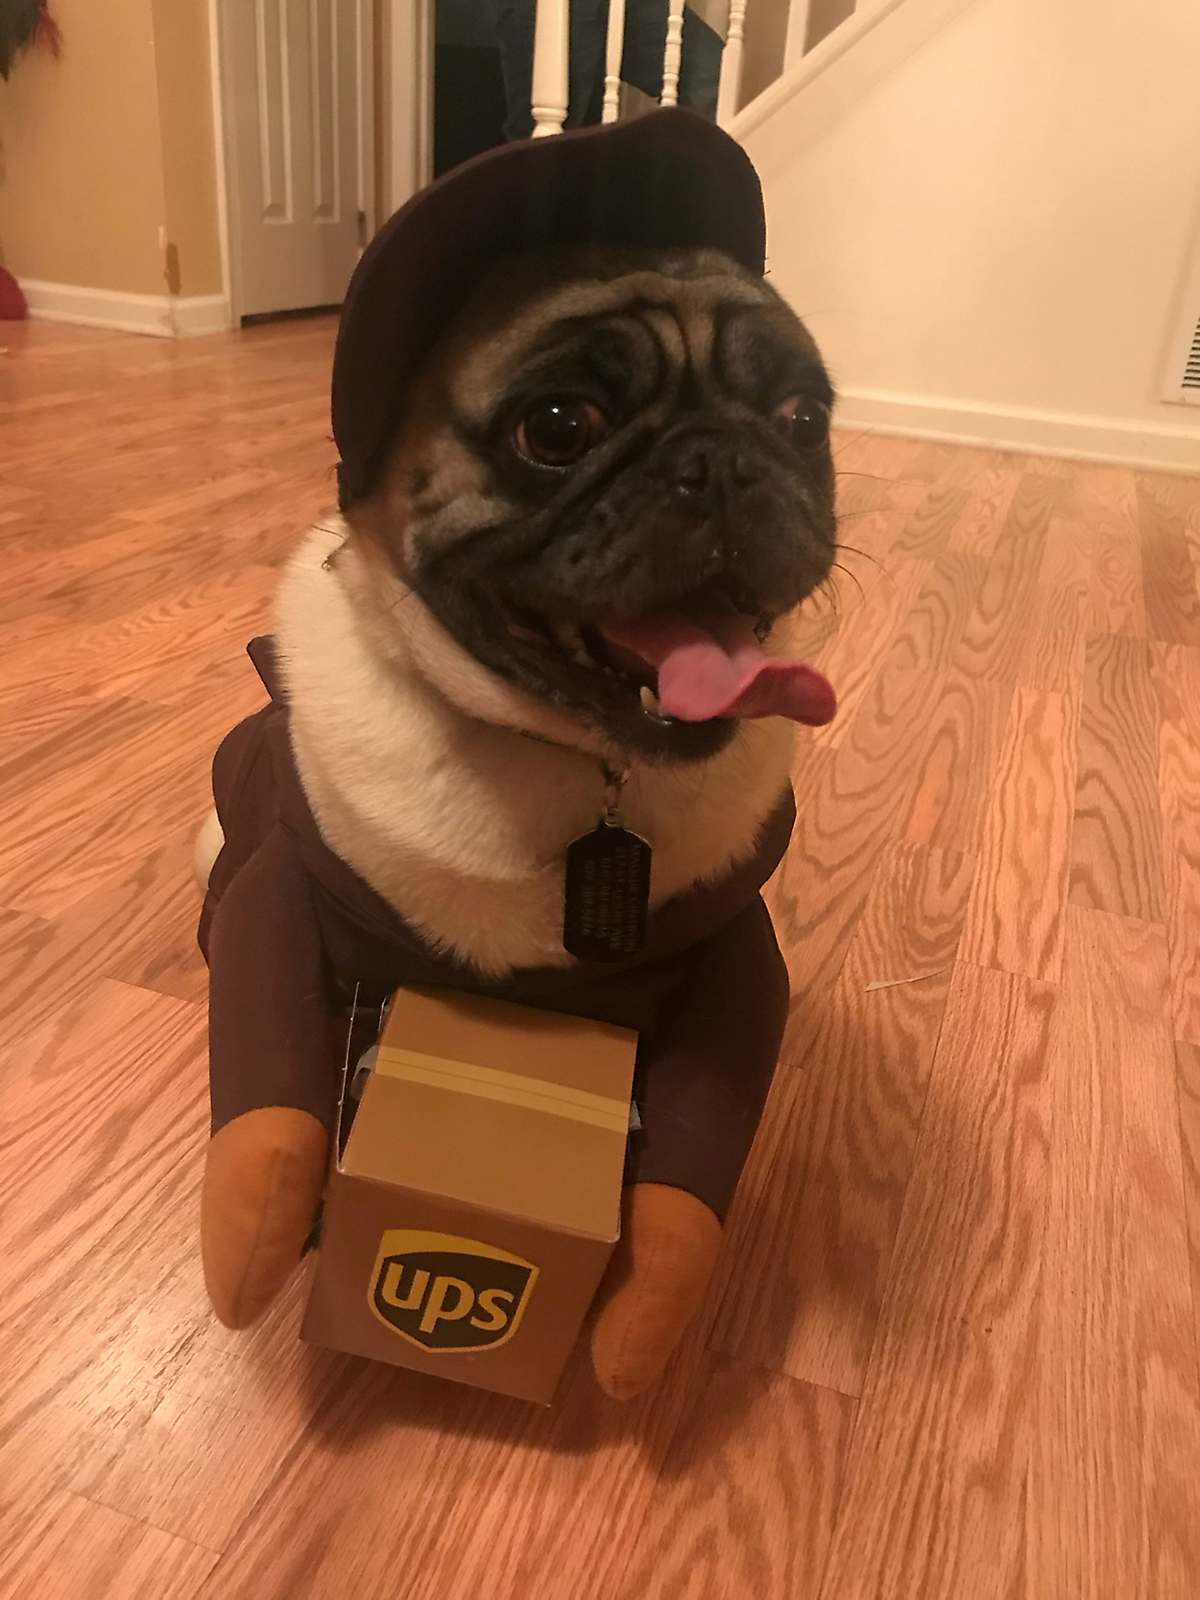 Pug dressed in pet costume as UPS driver